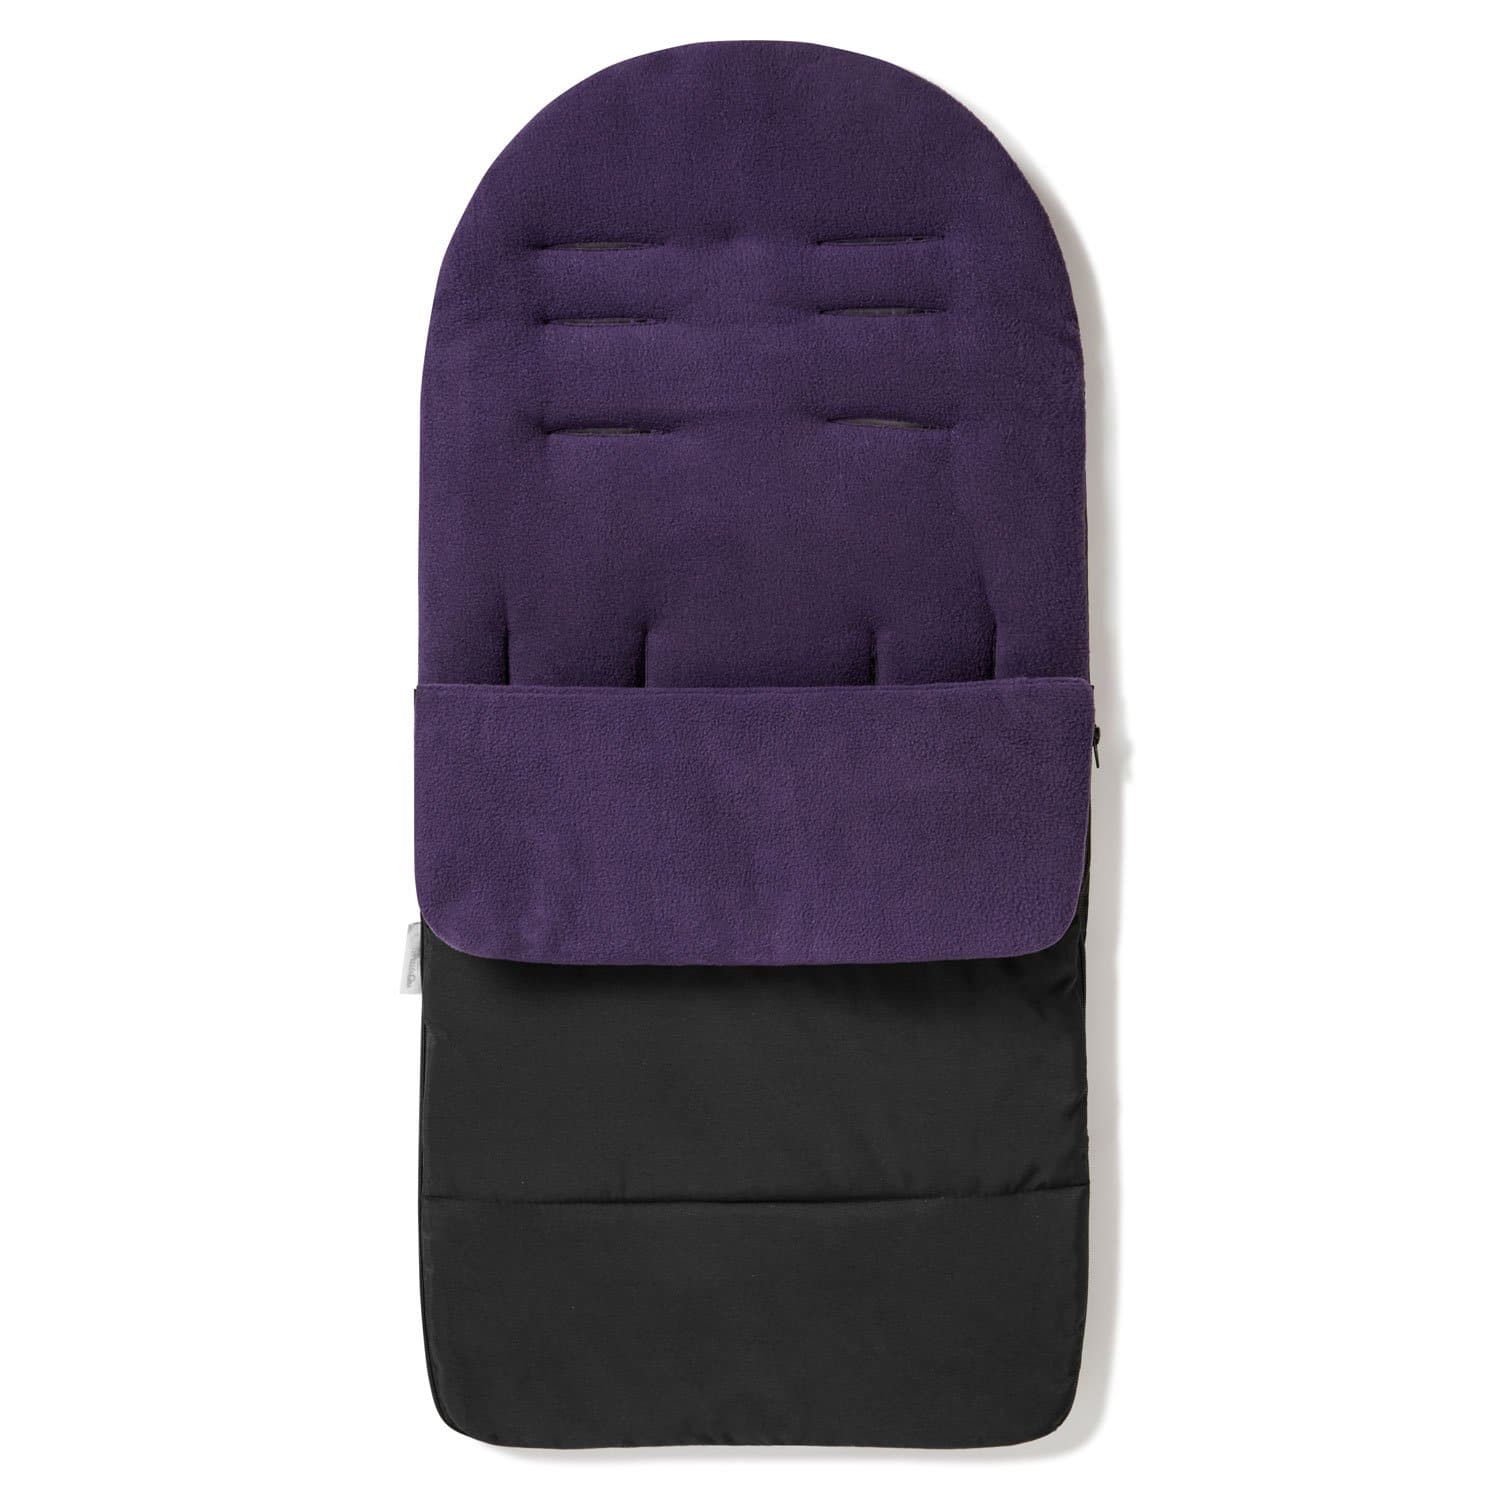 Premium Footmuff / Cosy Toes Compatible with Kinderkraft - Plum Purple / Fits All Models | For Your Little One